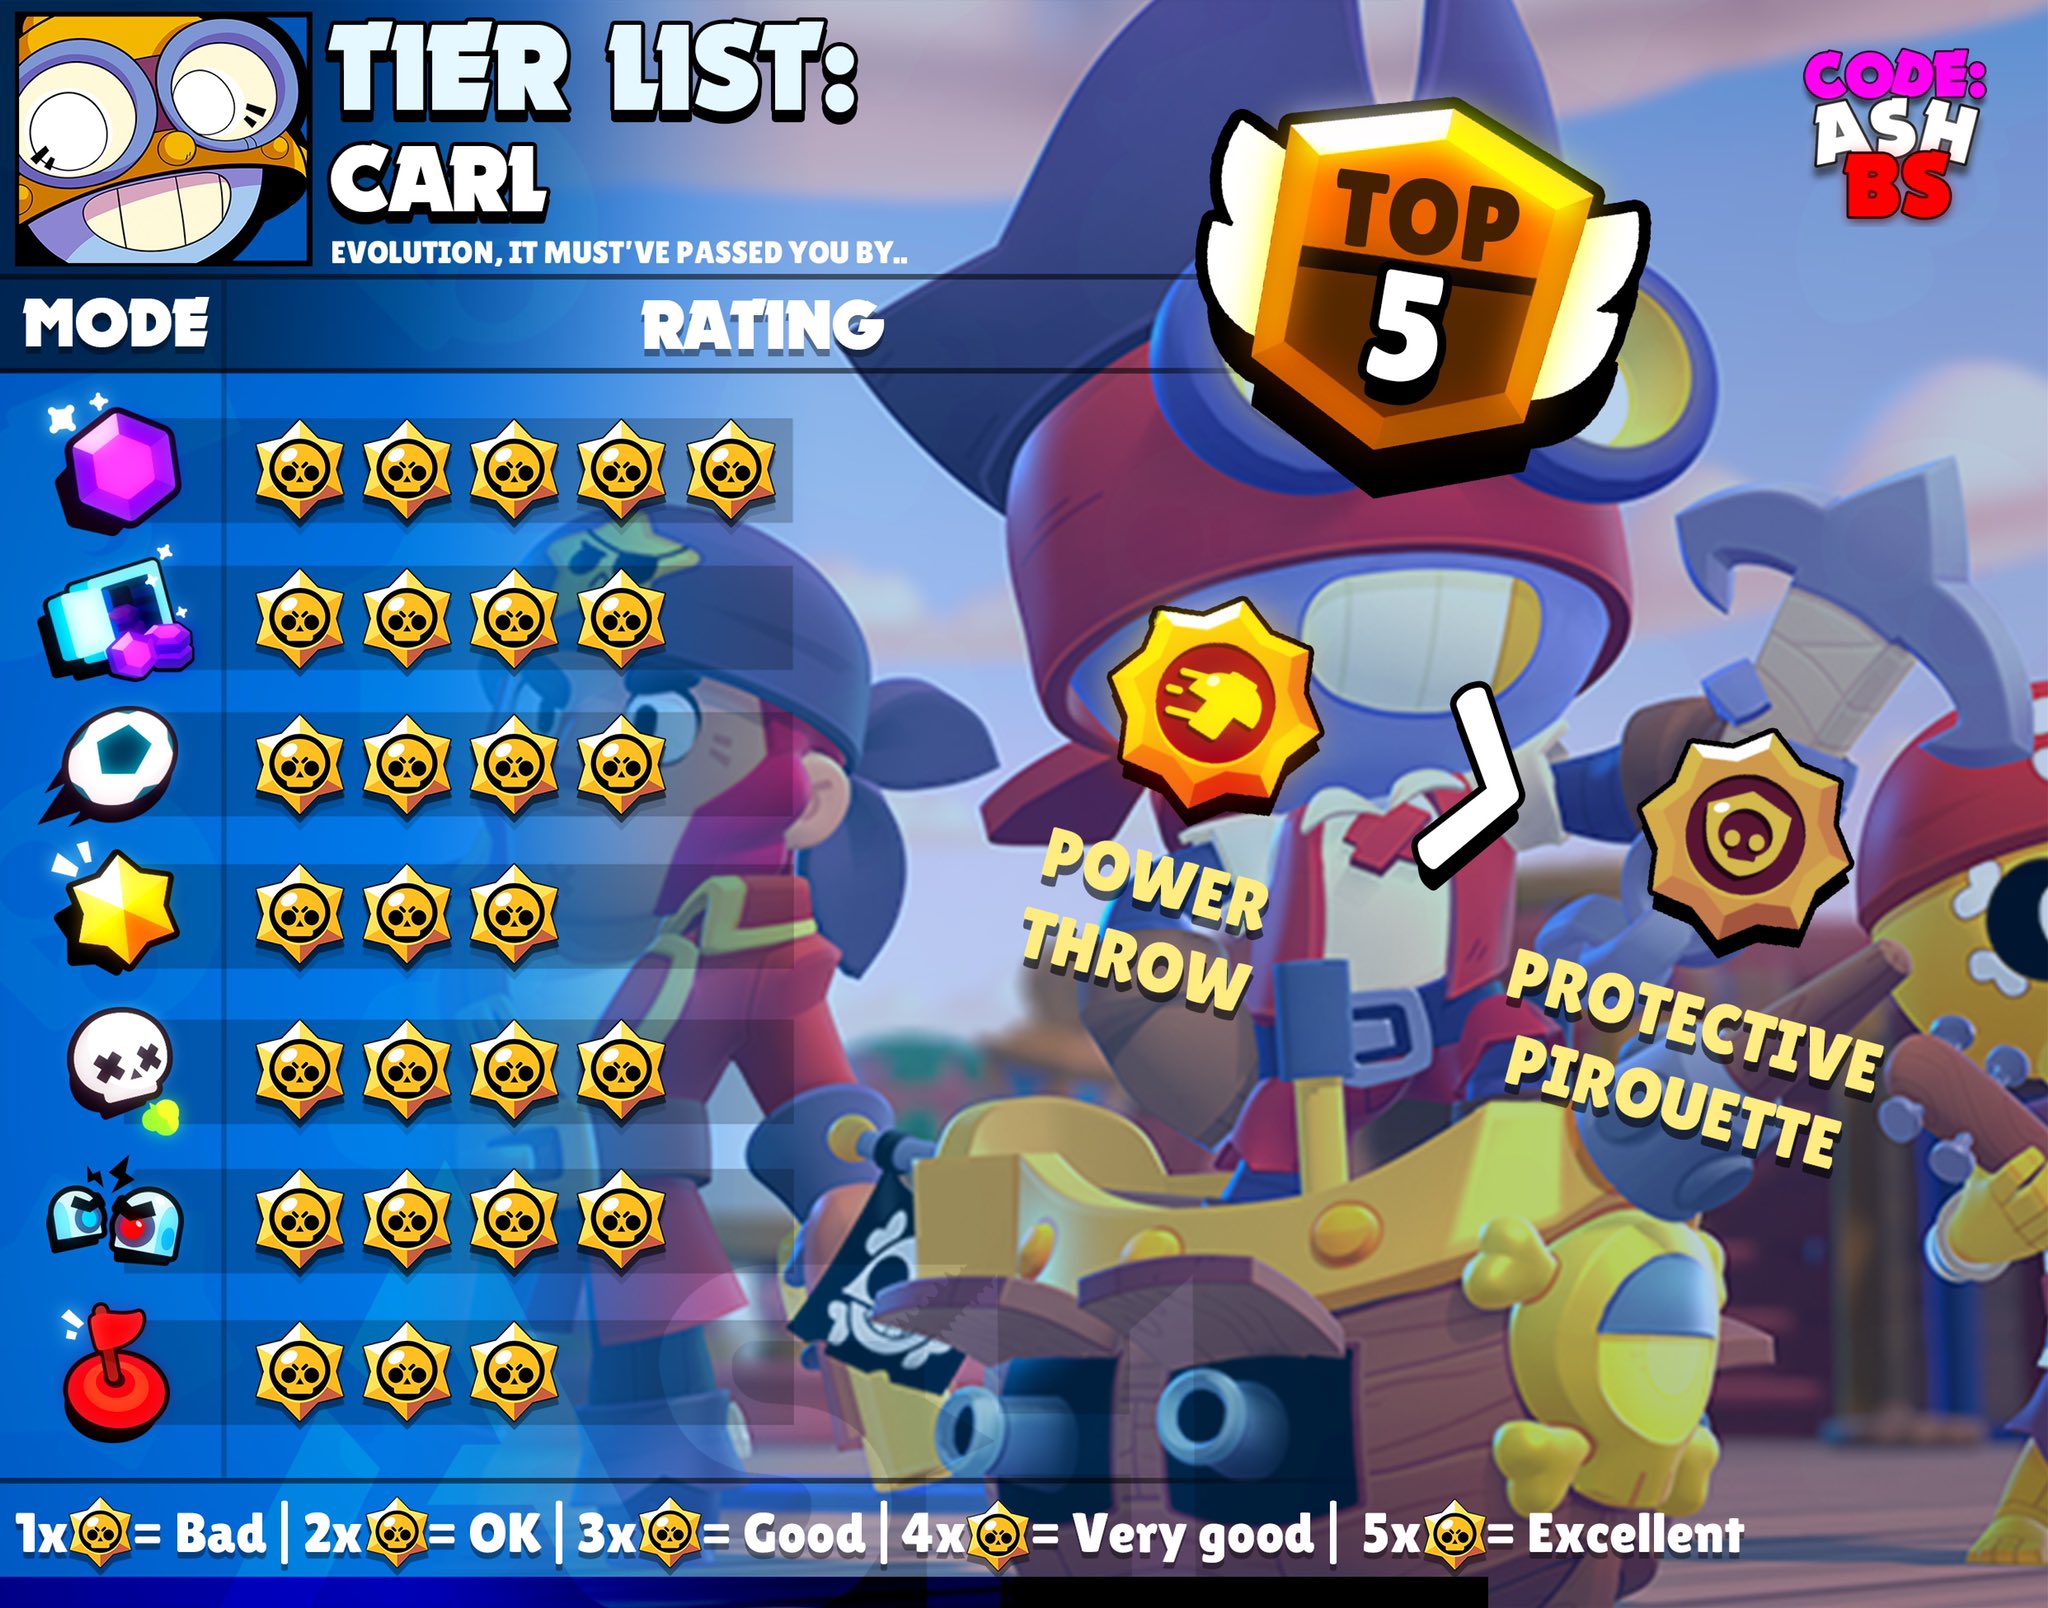 Code Ashbs On Twitter Carl Tier List For Every Game Mode Along With The Best Maps And Suggested Comps He S One Of The Best Brawlers In The Game Good Everywhere Carl Brawlstars - all brawlers in brawl stars 2021 list